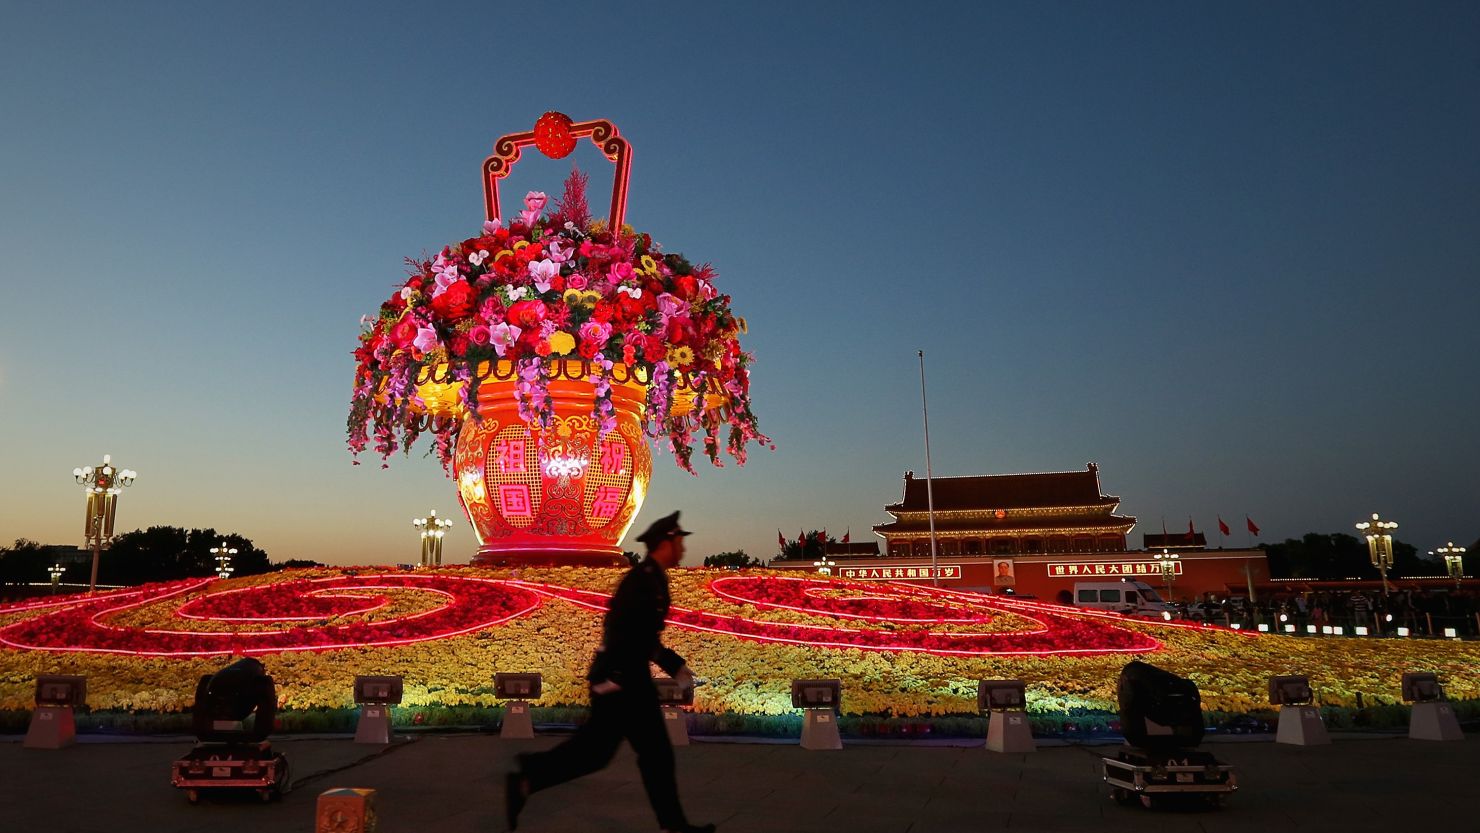 A giant flower looms over Tiananmen Square as Beijing prepares for China's once-in-a-decade leadership change.